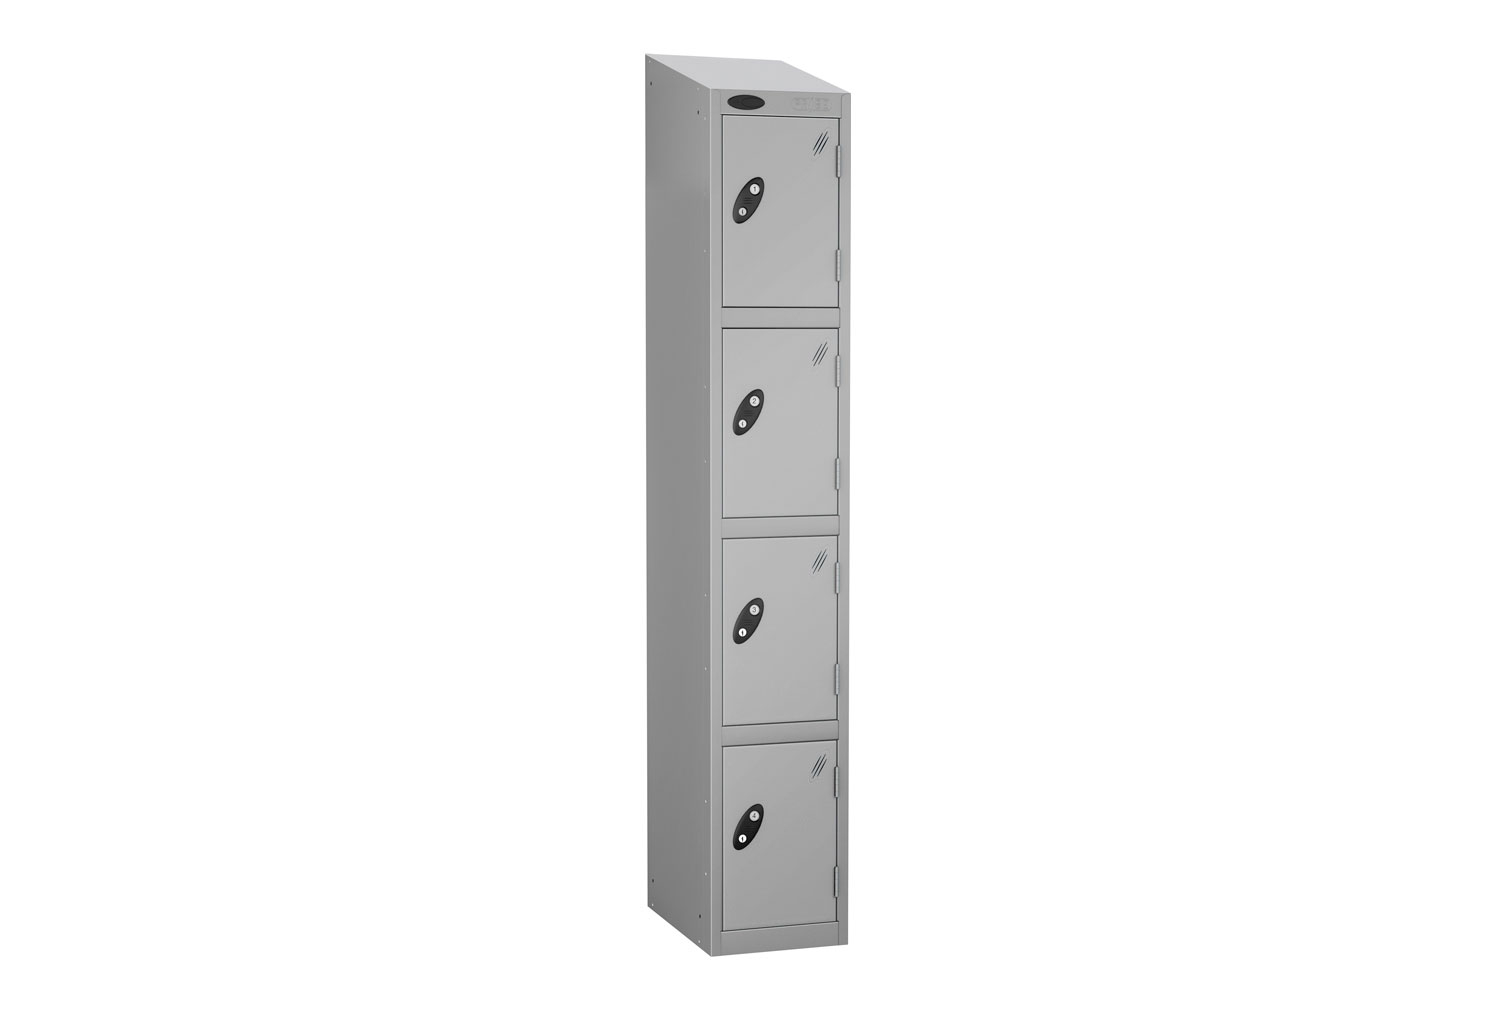 Probe Everyday 4 Door Locker With Sloping Top, 31wx46dx193h (cm), Hasp Lock, Silver Body, Silver